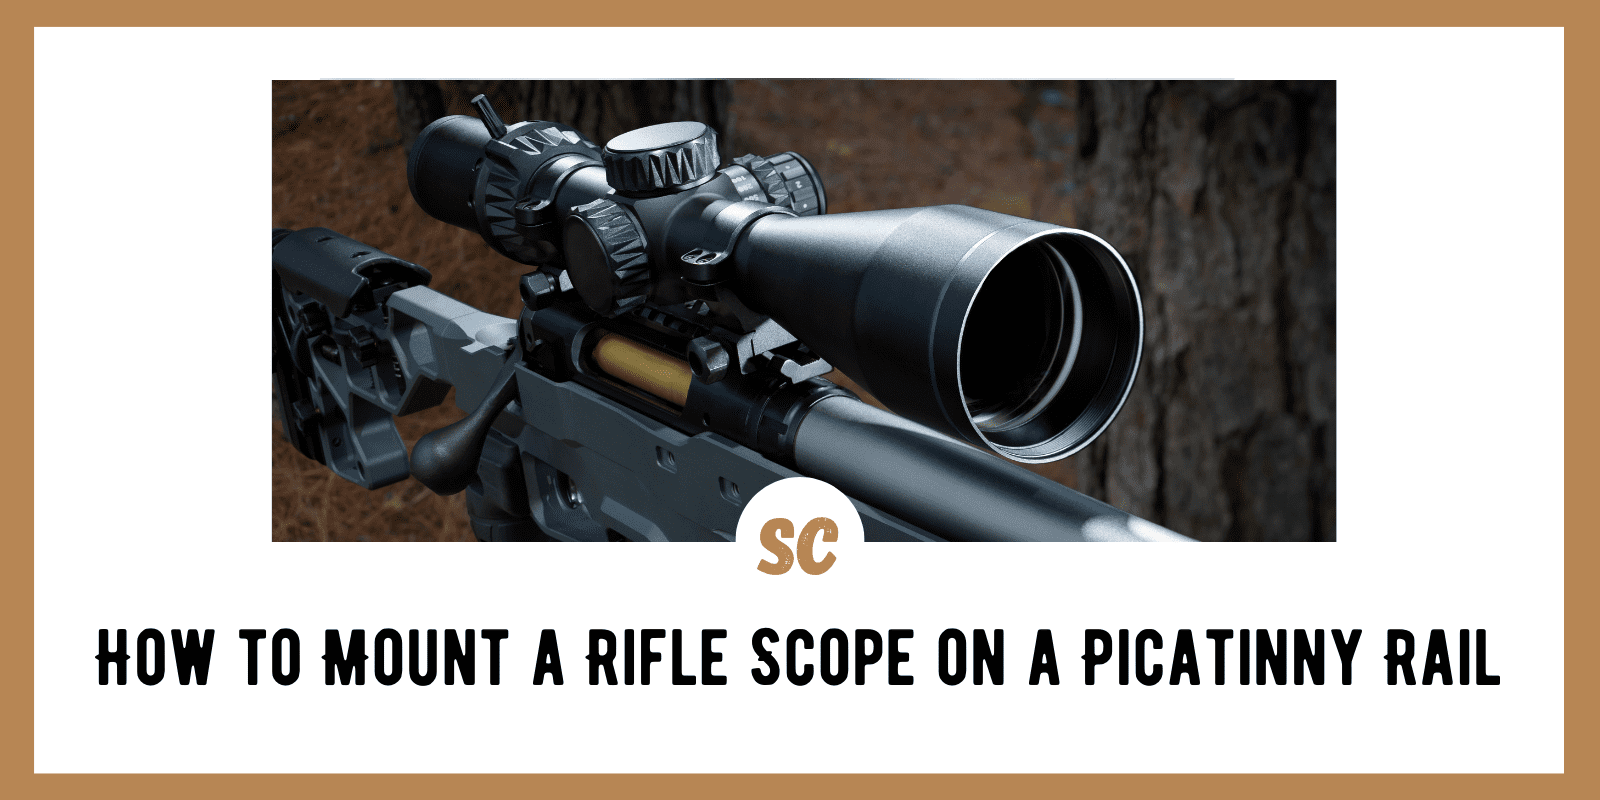 How to Mount a Rifle Scope on a Picatinny Rail